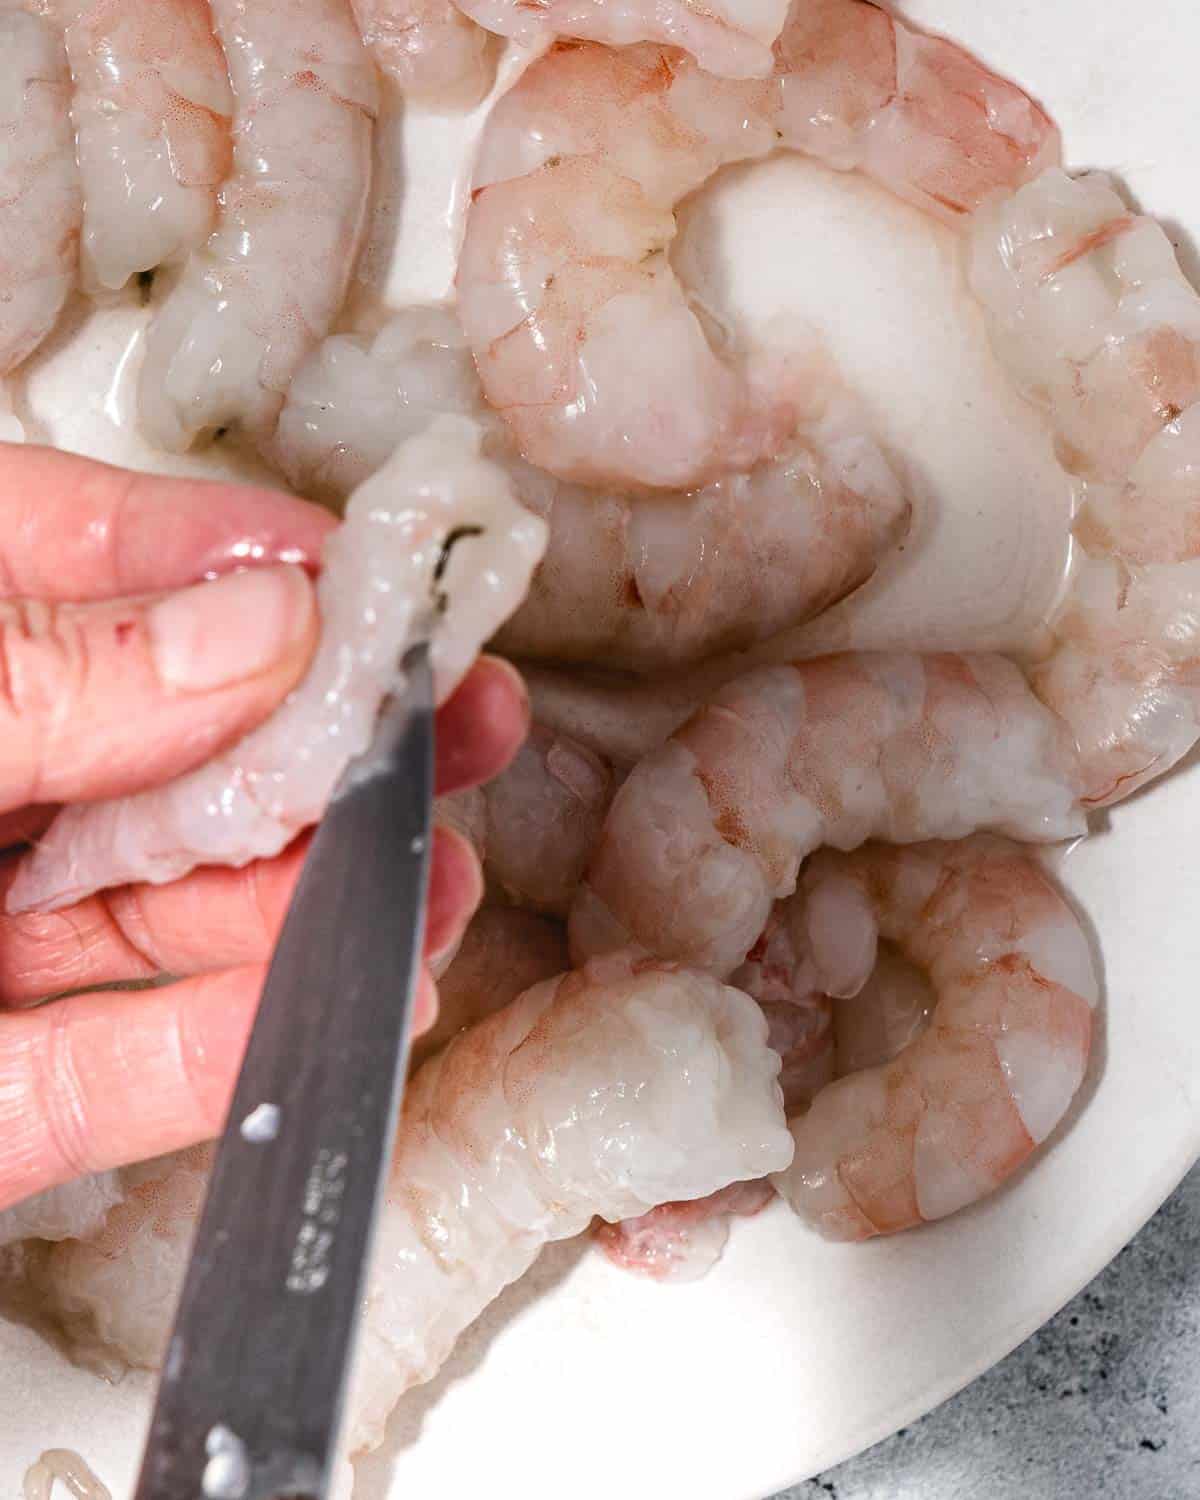 Removing intestinal tract from a shrimp.